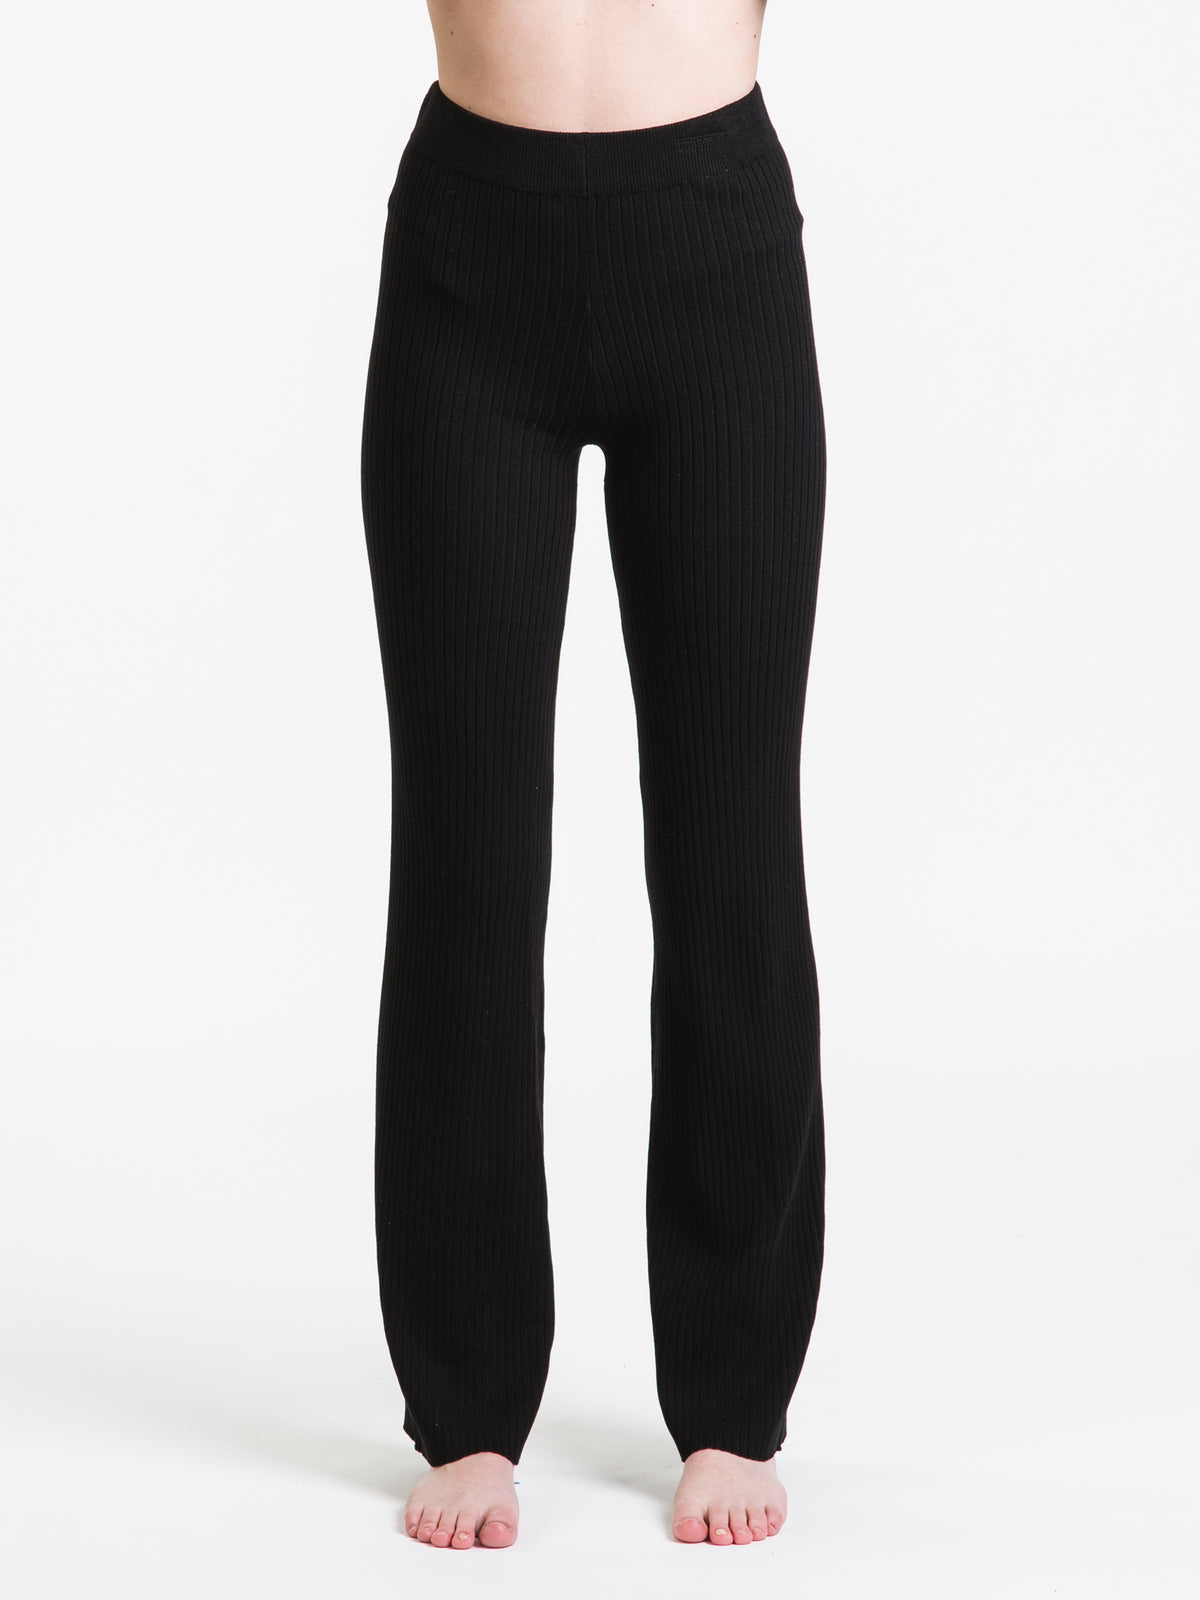 Ruffle Flare Hem Ribbed Knit Pants in Black - Retro, Indie and